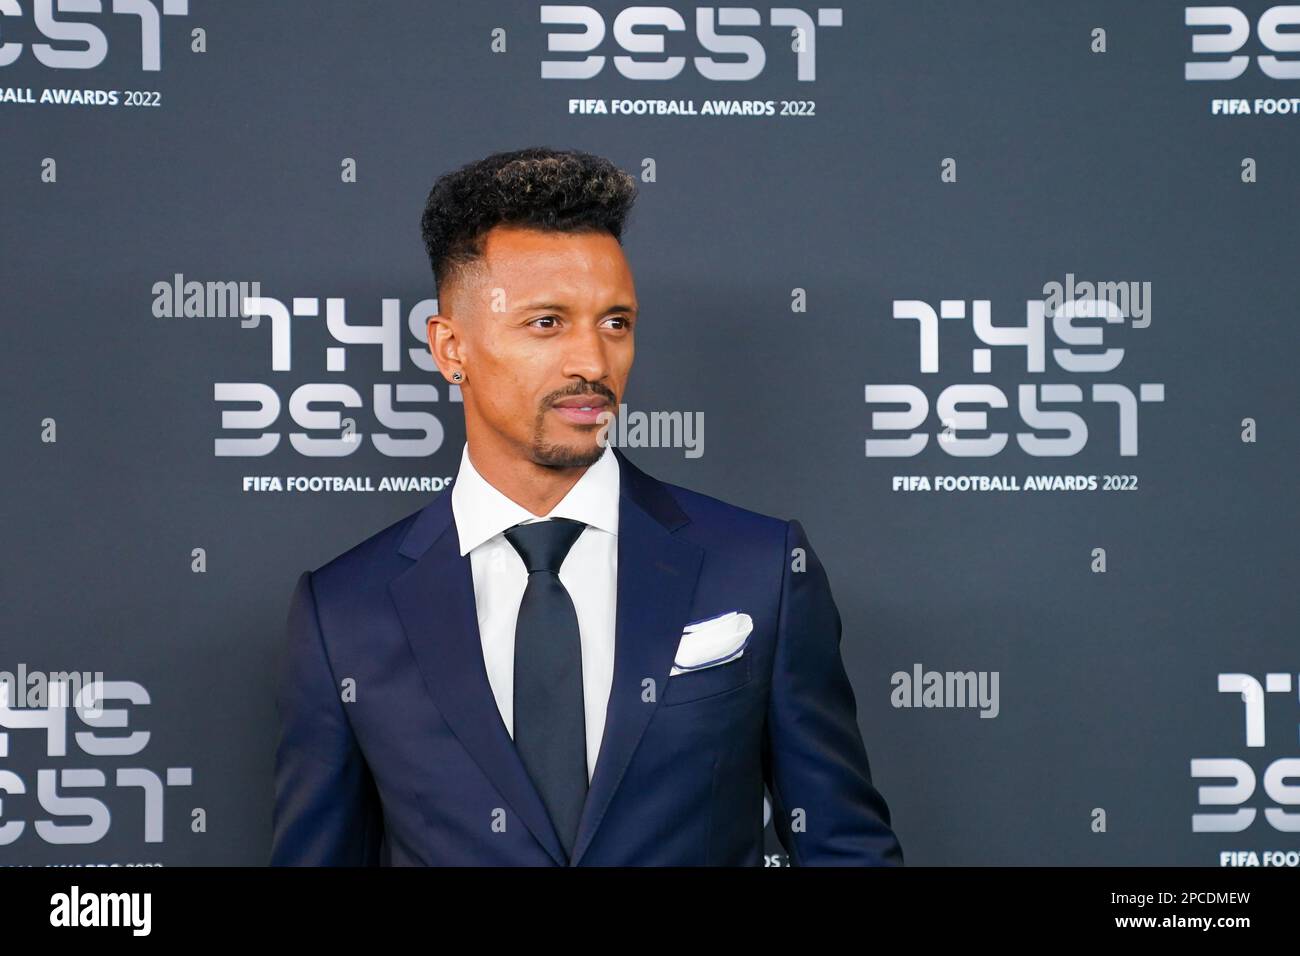 Paris, France. 27th Feb, 2023. Luis Nani - football player of Portugal - during the The Best FIFA Football Awards 2022 at Salle Pleyel in Paris, France. (Foto: Daniela Porcelli/Sports Press Photo/C - ONE HOUR DEADLINE - ONLY ACTIVATE FTP IF IMAGES LESS THAN ONE HOUR OLD - Alamy) Credit: SPP Sport Press Photo. /Alamy Live News Stock Photo